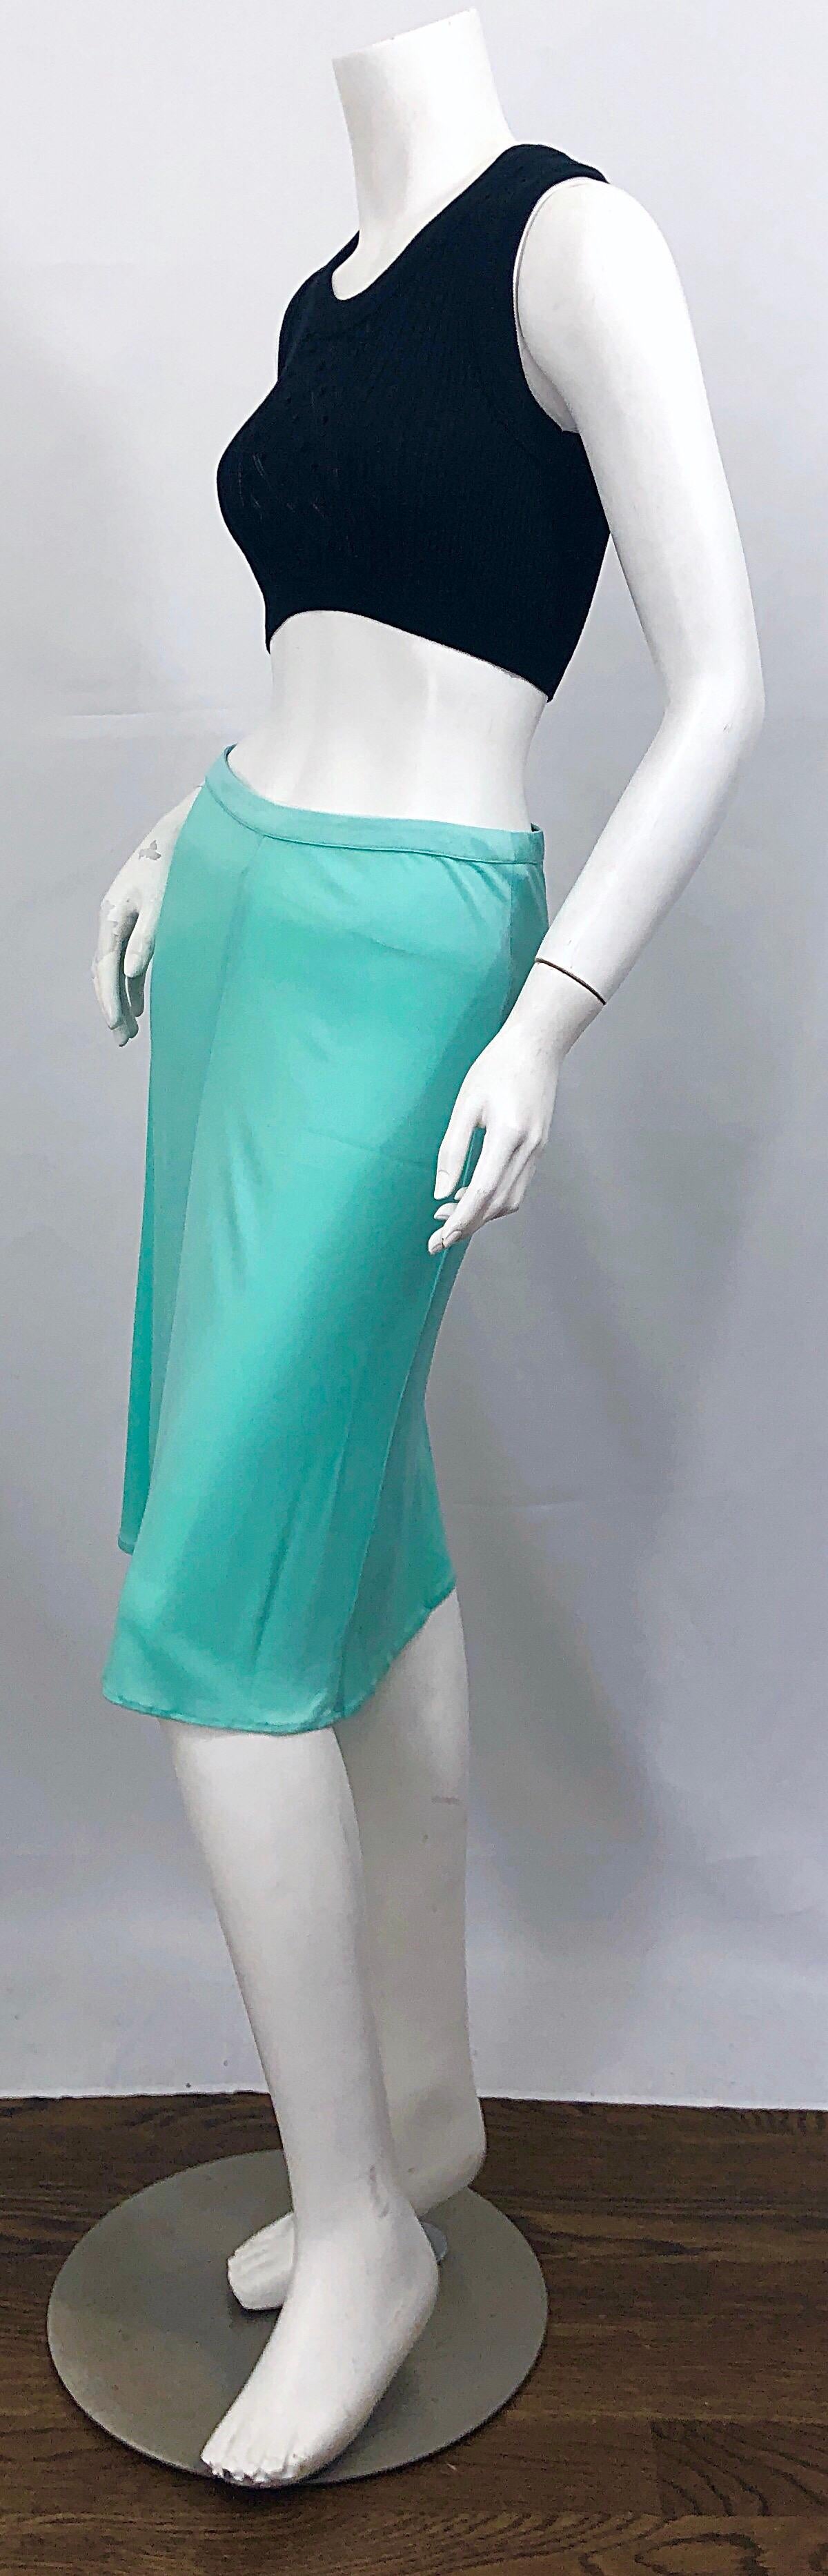 1990s Gianni Versace Couture Teal Turquoise Blue Silk Jersey Vintage 90s Skirt In Excellent Condition For Sale In San Diego, CA